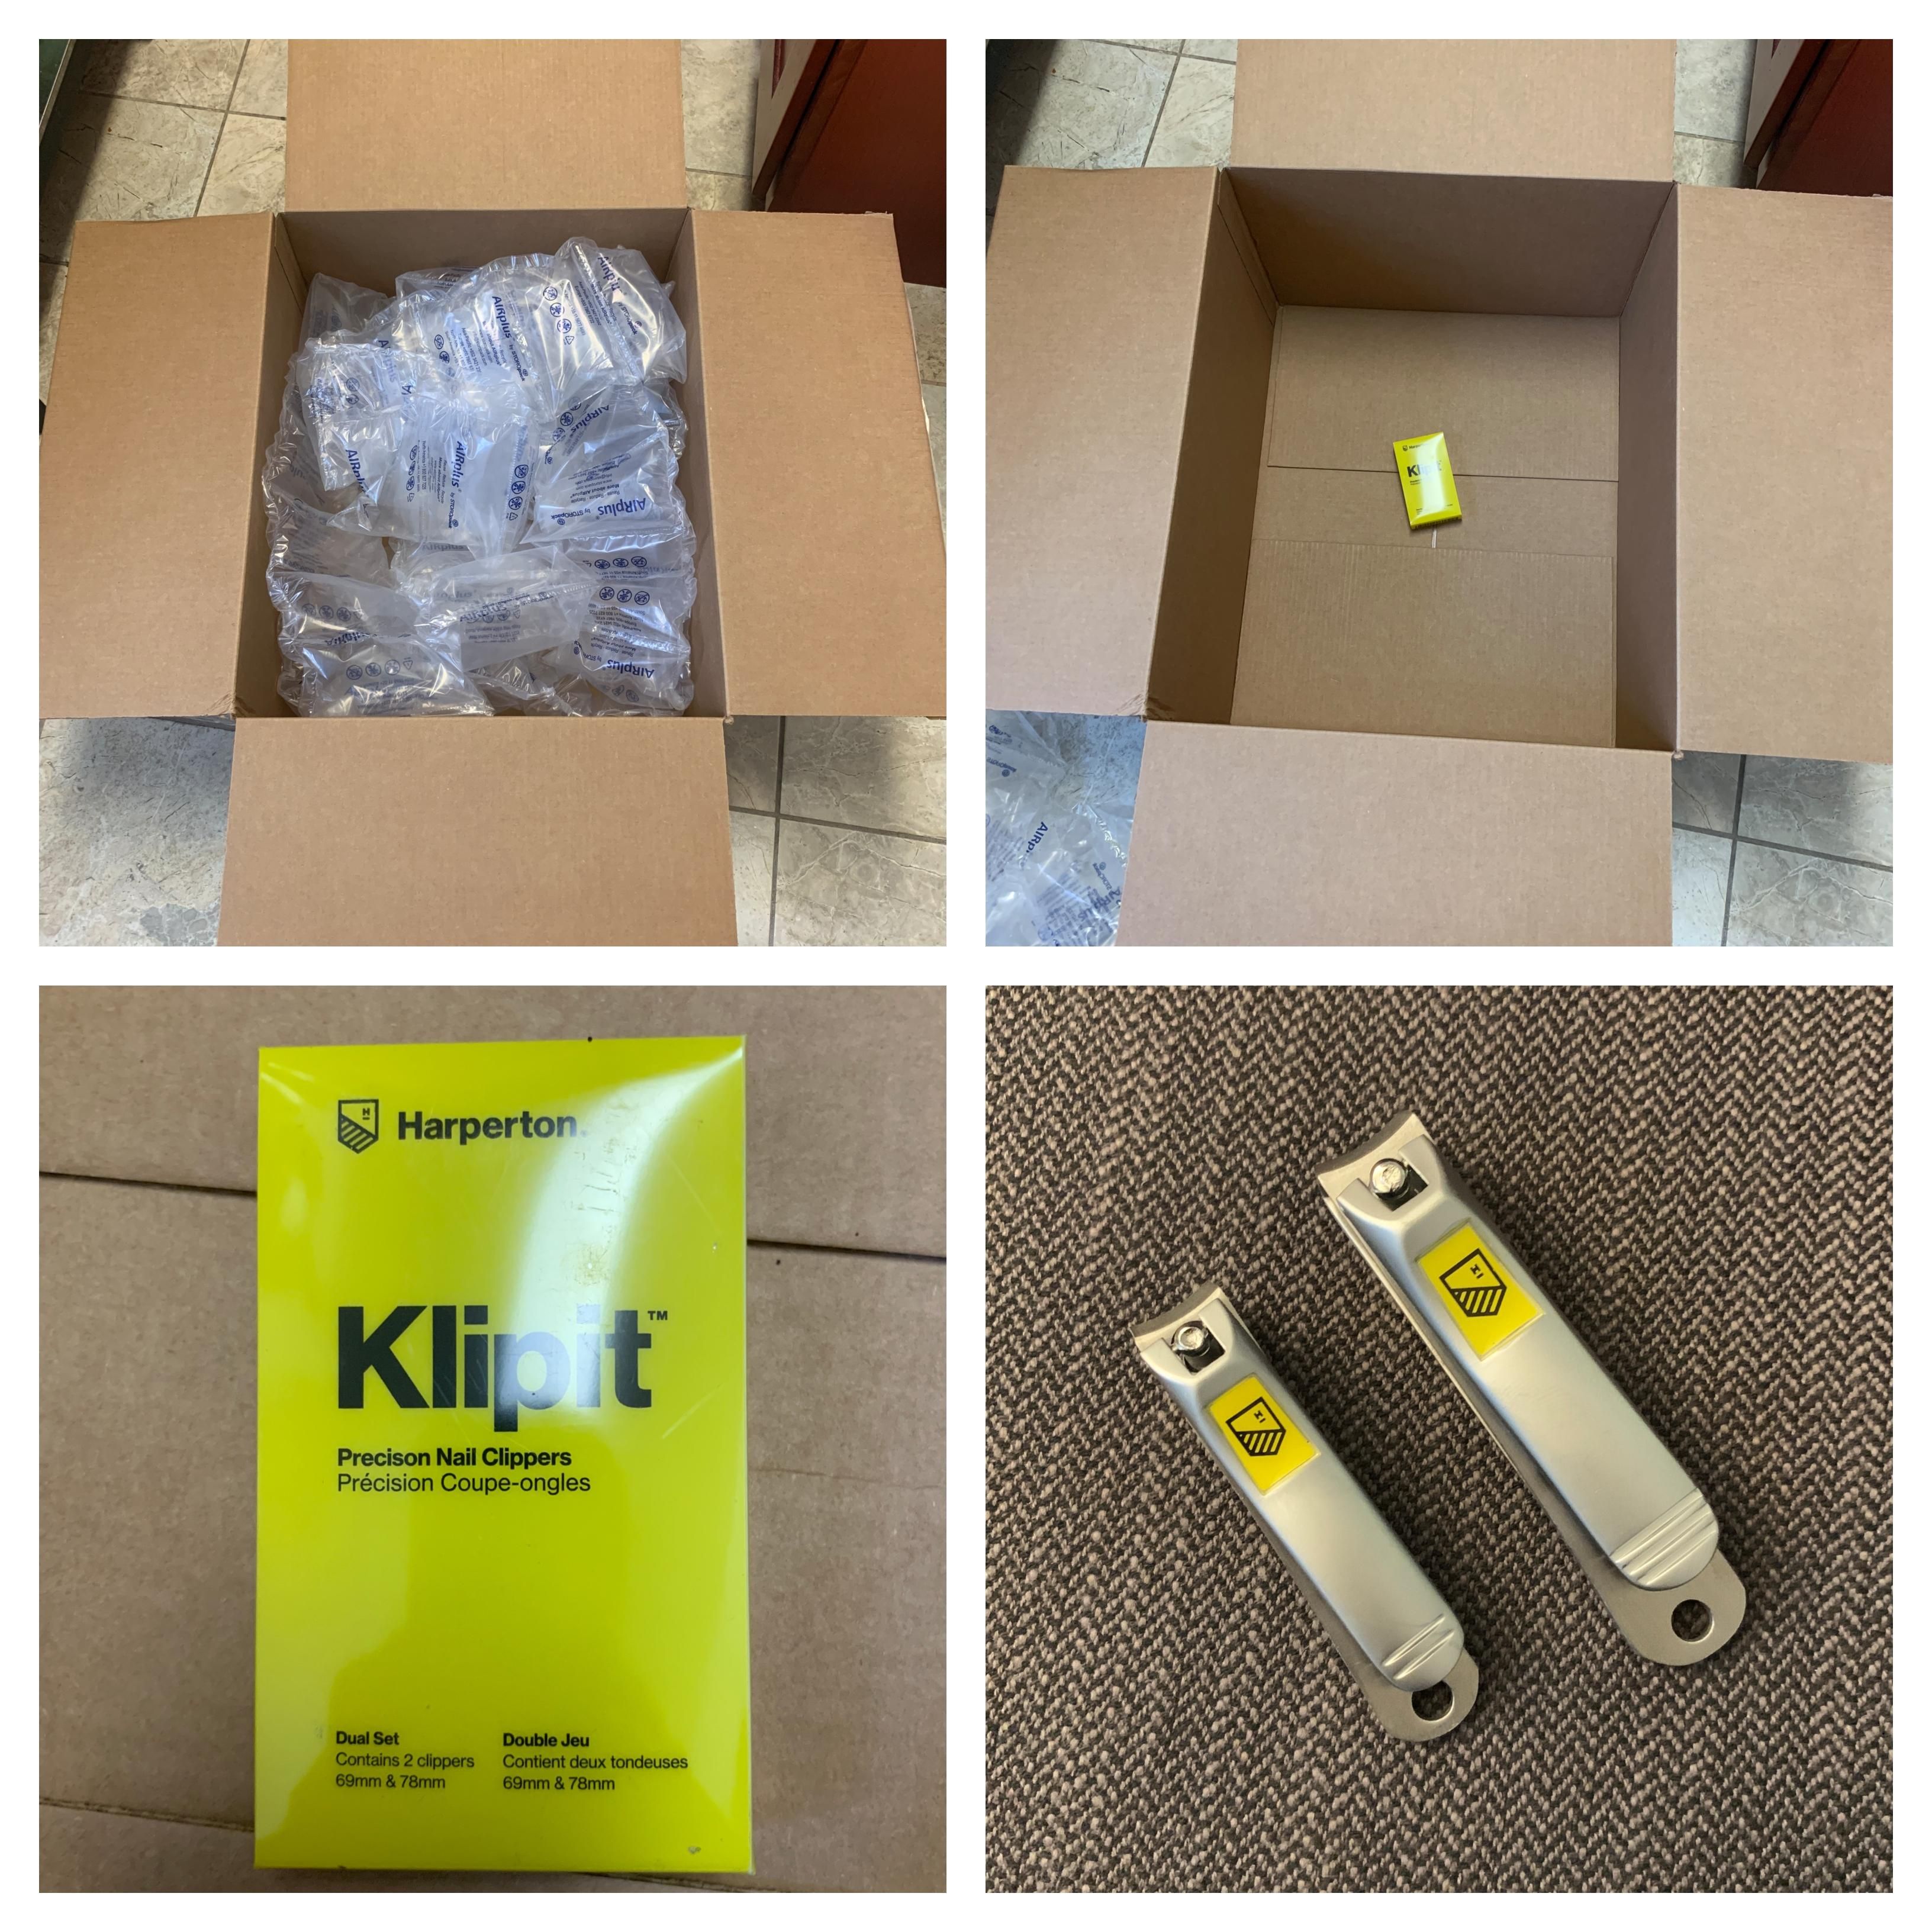 Thank you, Amazon, for protecting my item during shipping.